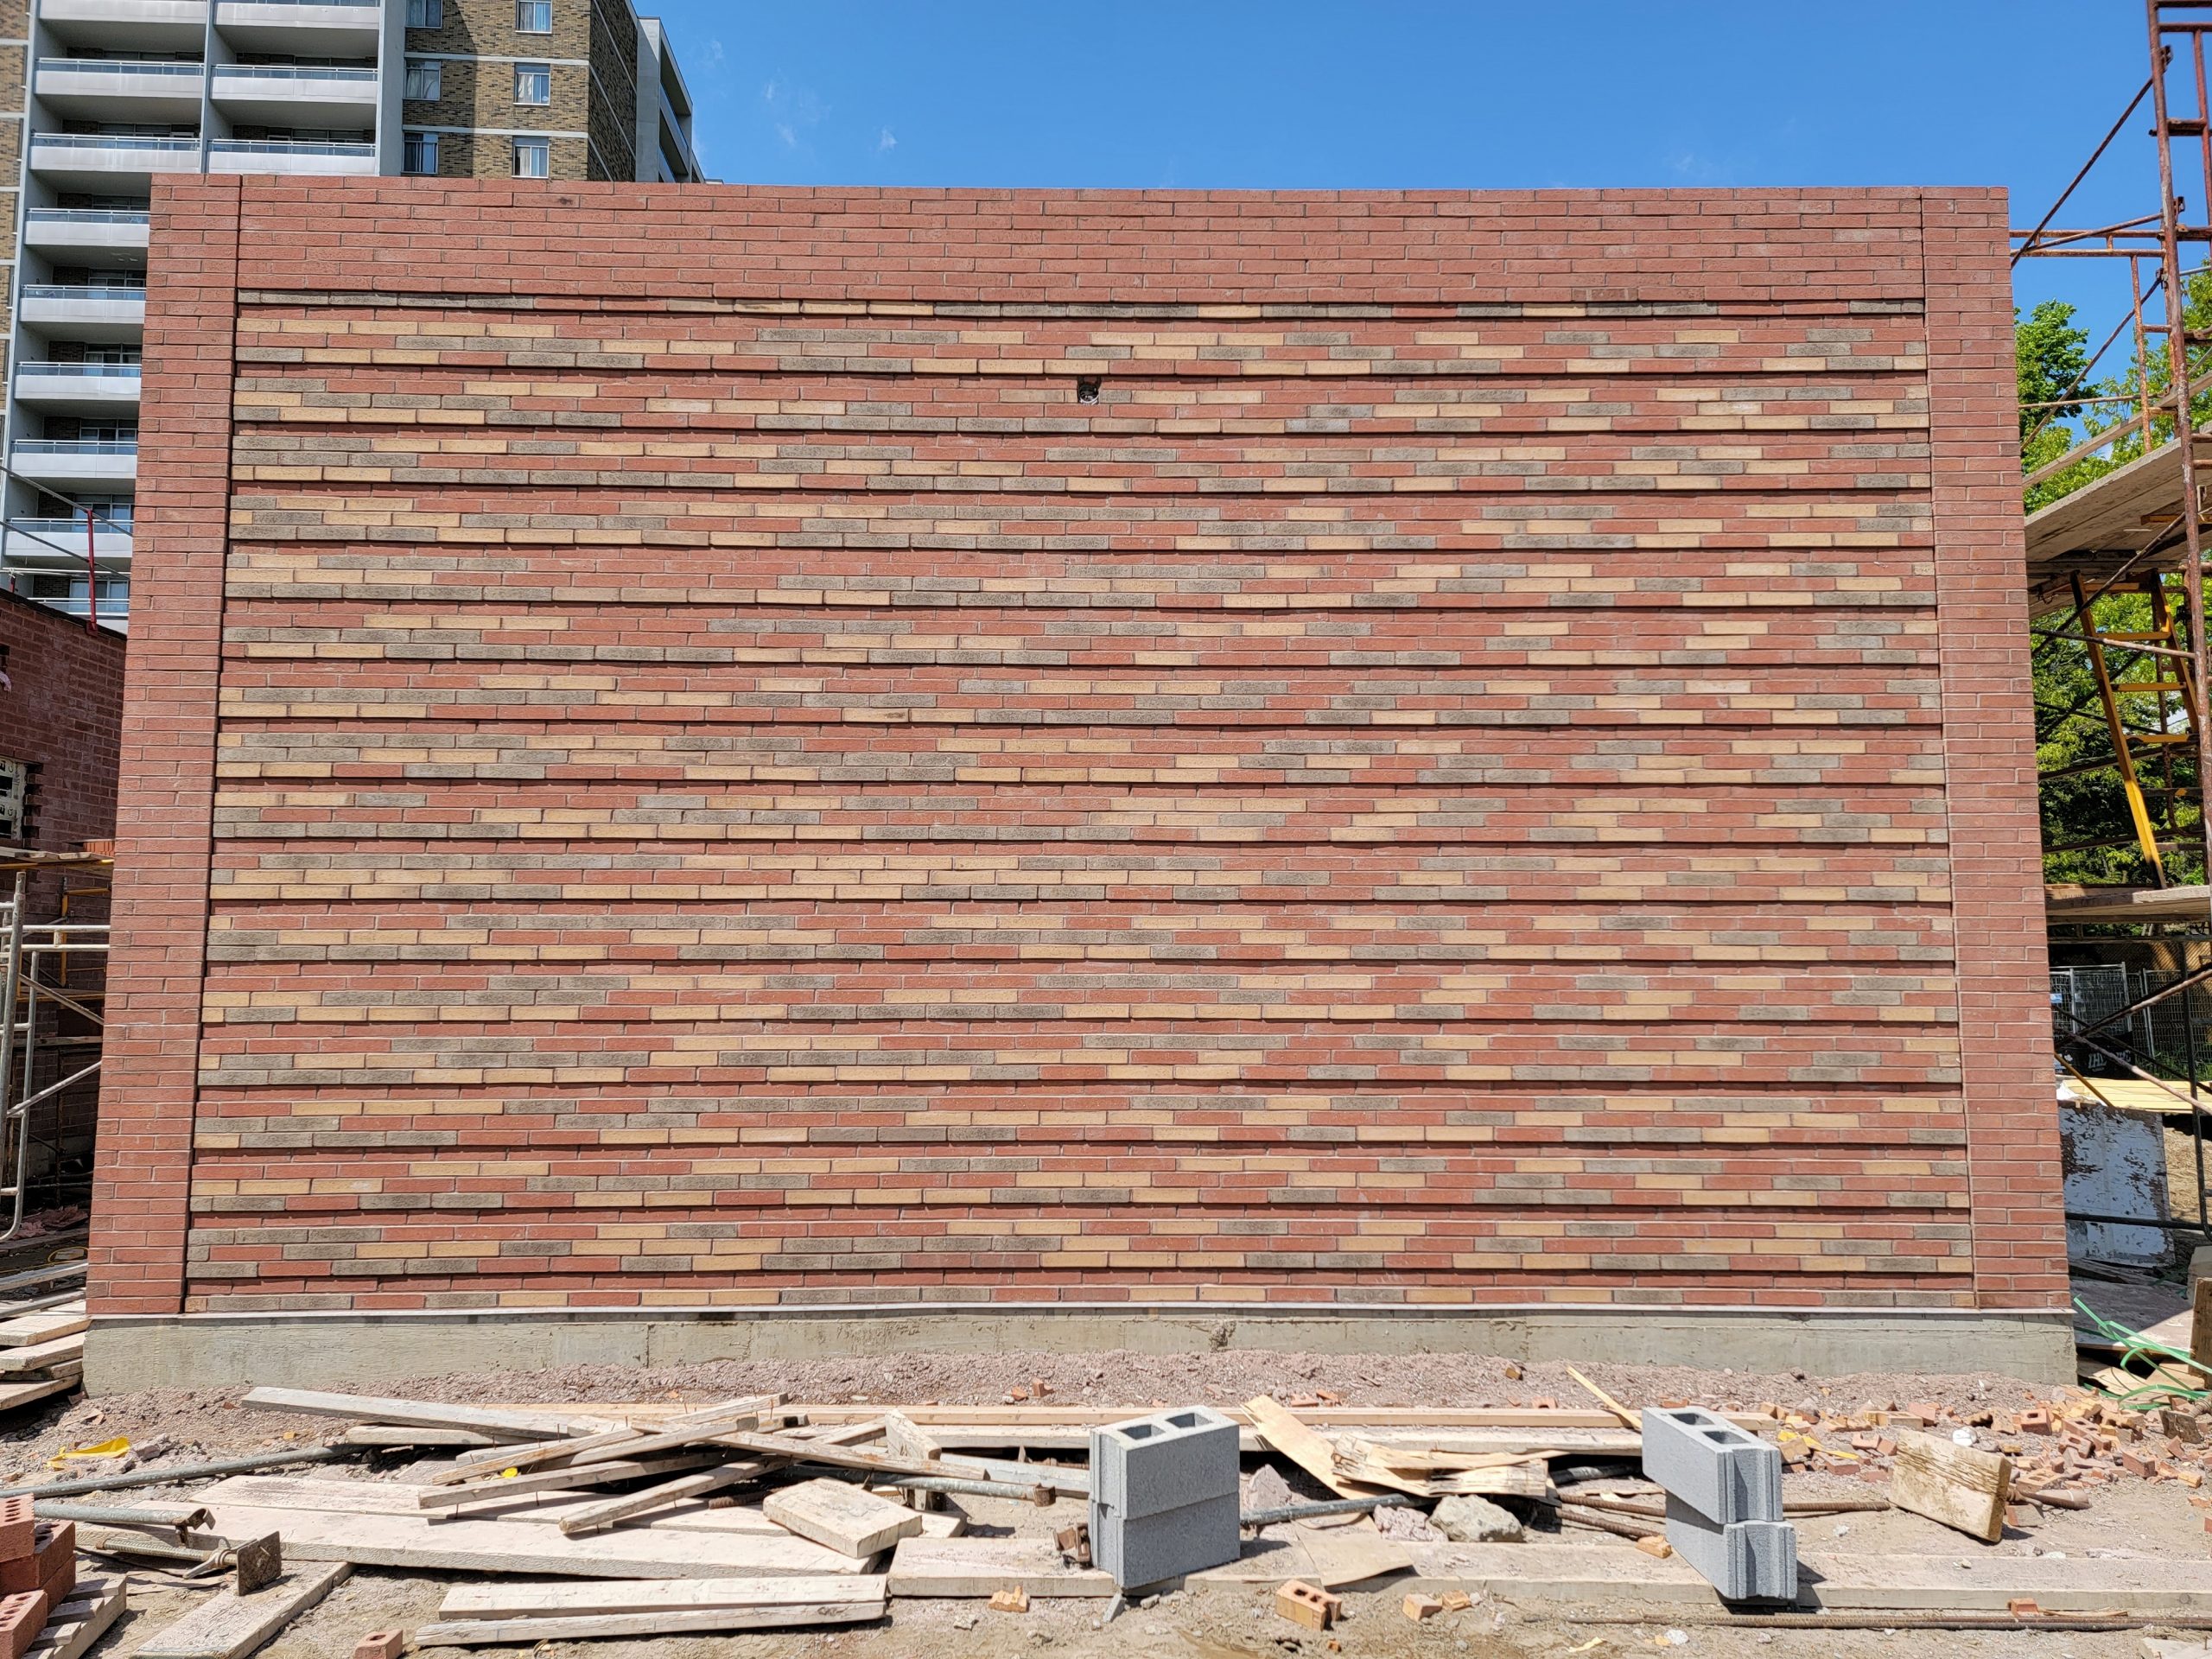 The completed reclaimed brick exterior of the new Zamboni Garage building